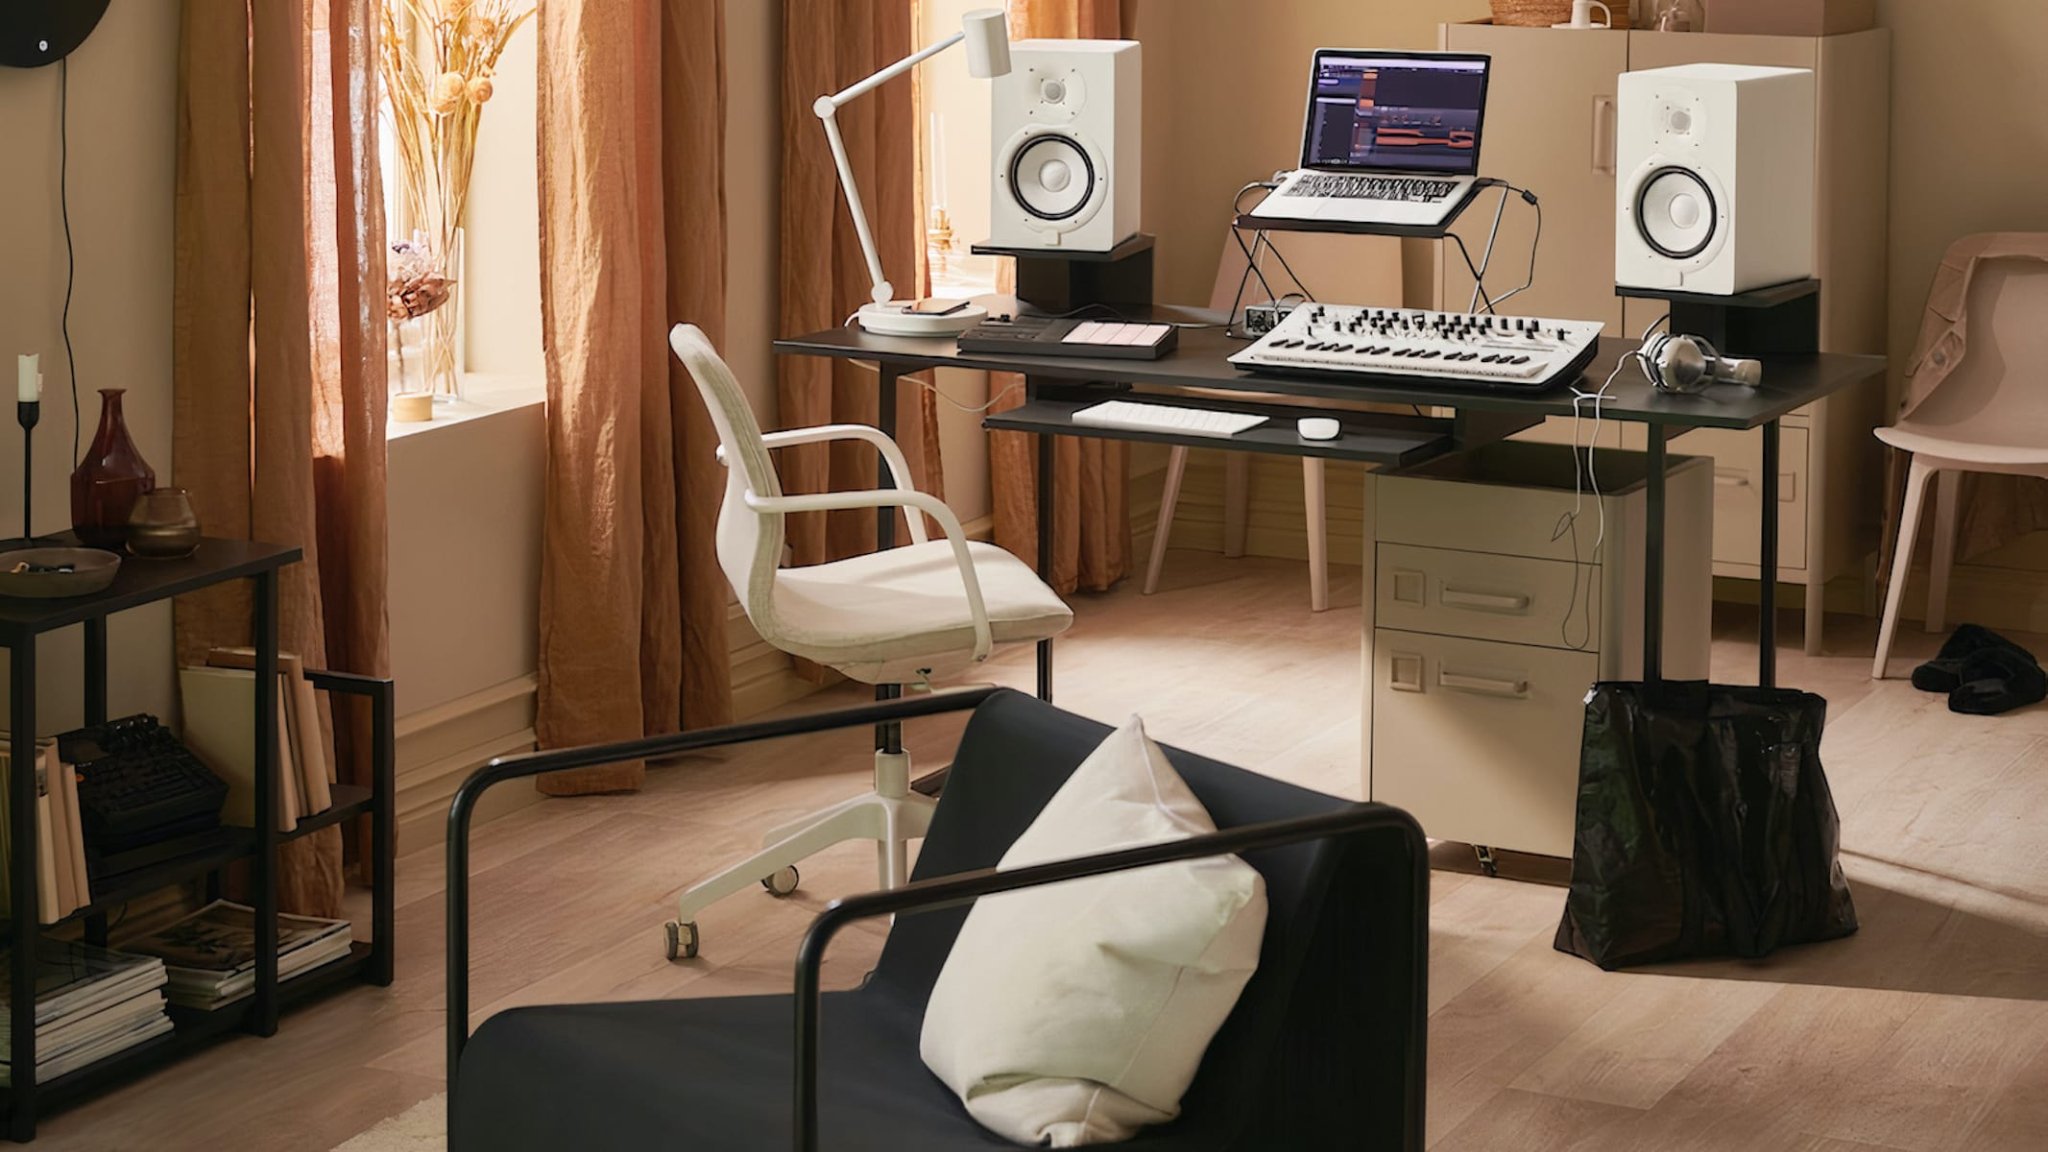 Ultimate gadget guide for home music setups—desks, music stations, amplifiers & more